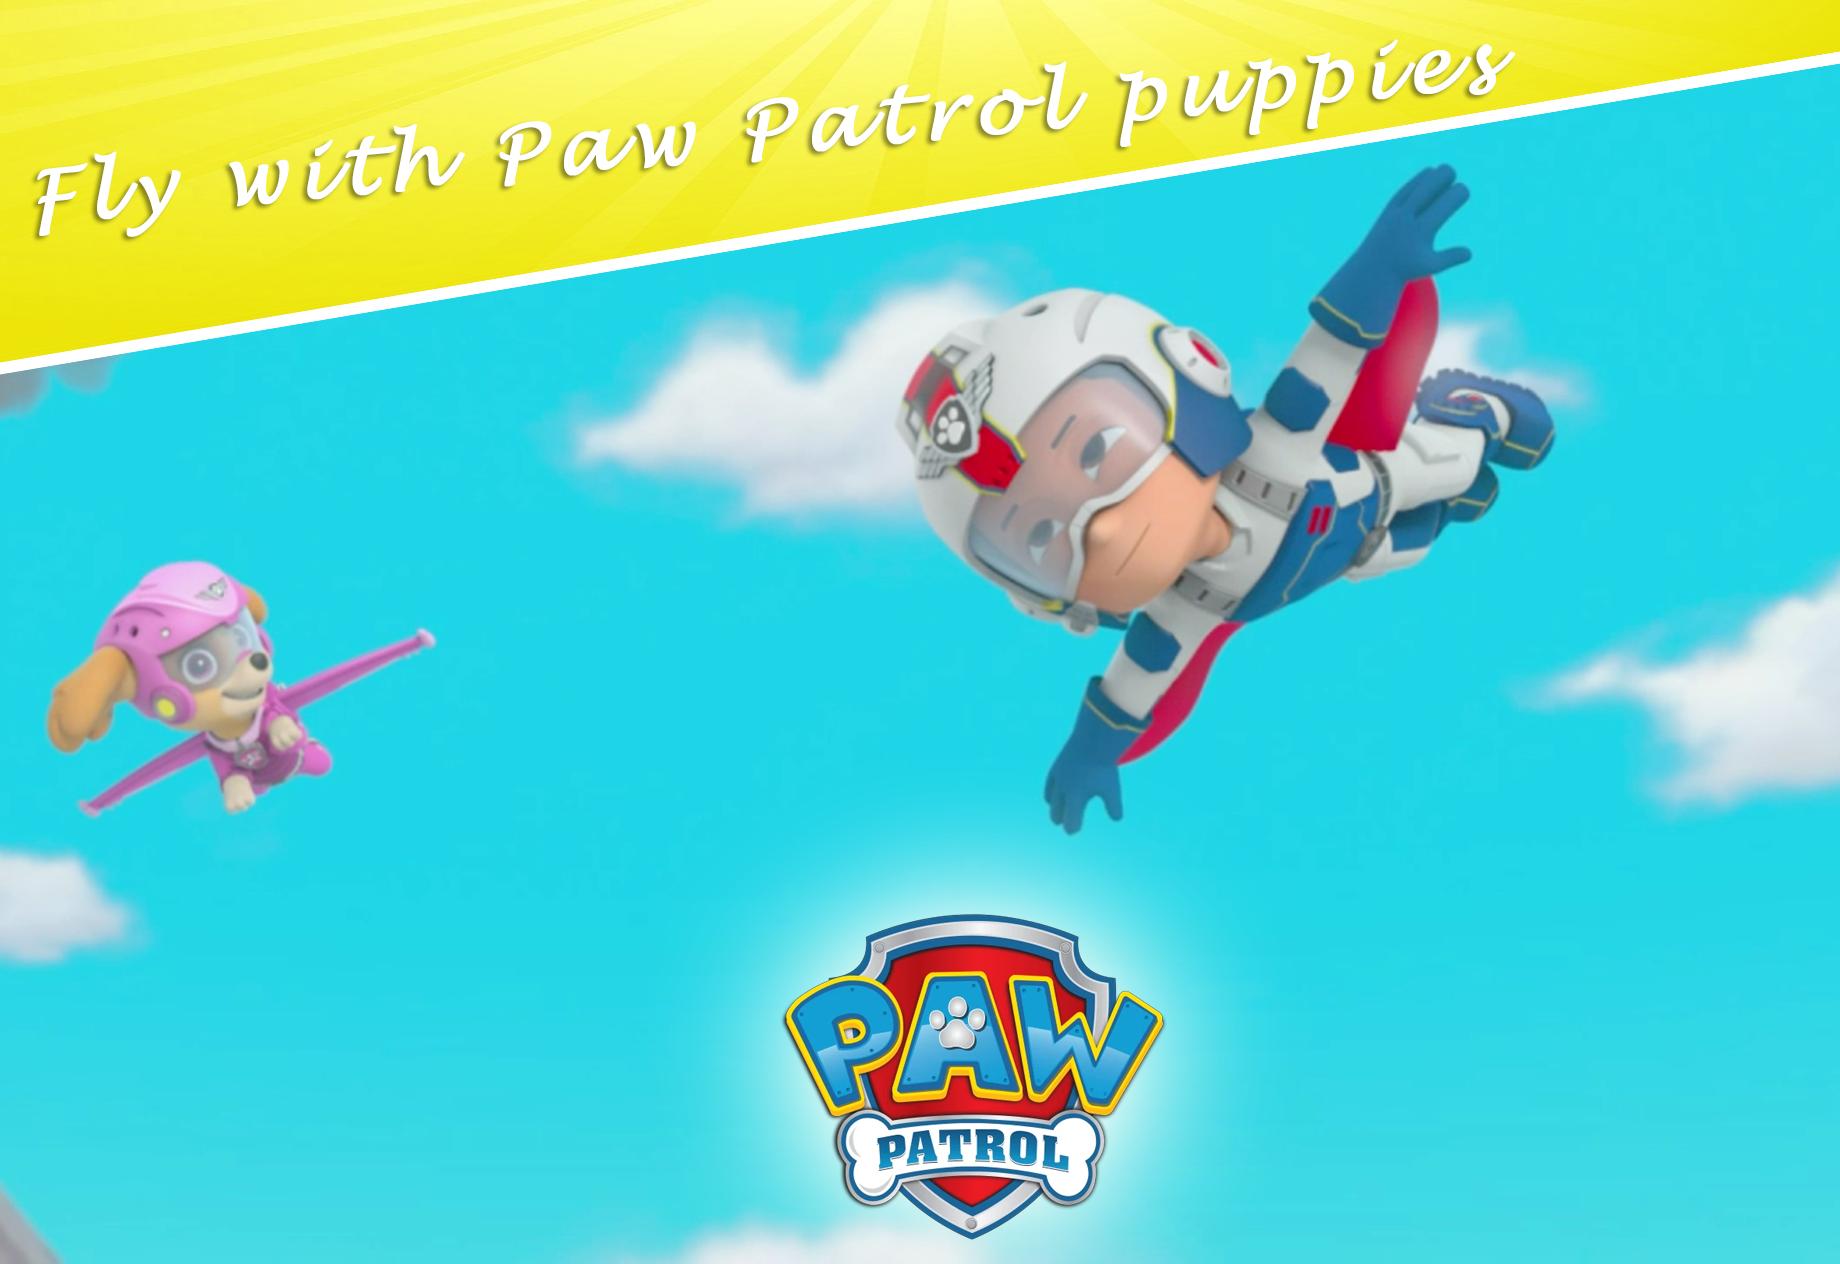 PAW Patrol : Jetpack in Sky for Android - APK Download